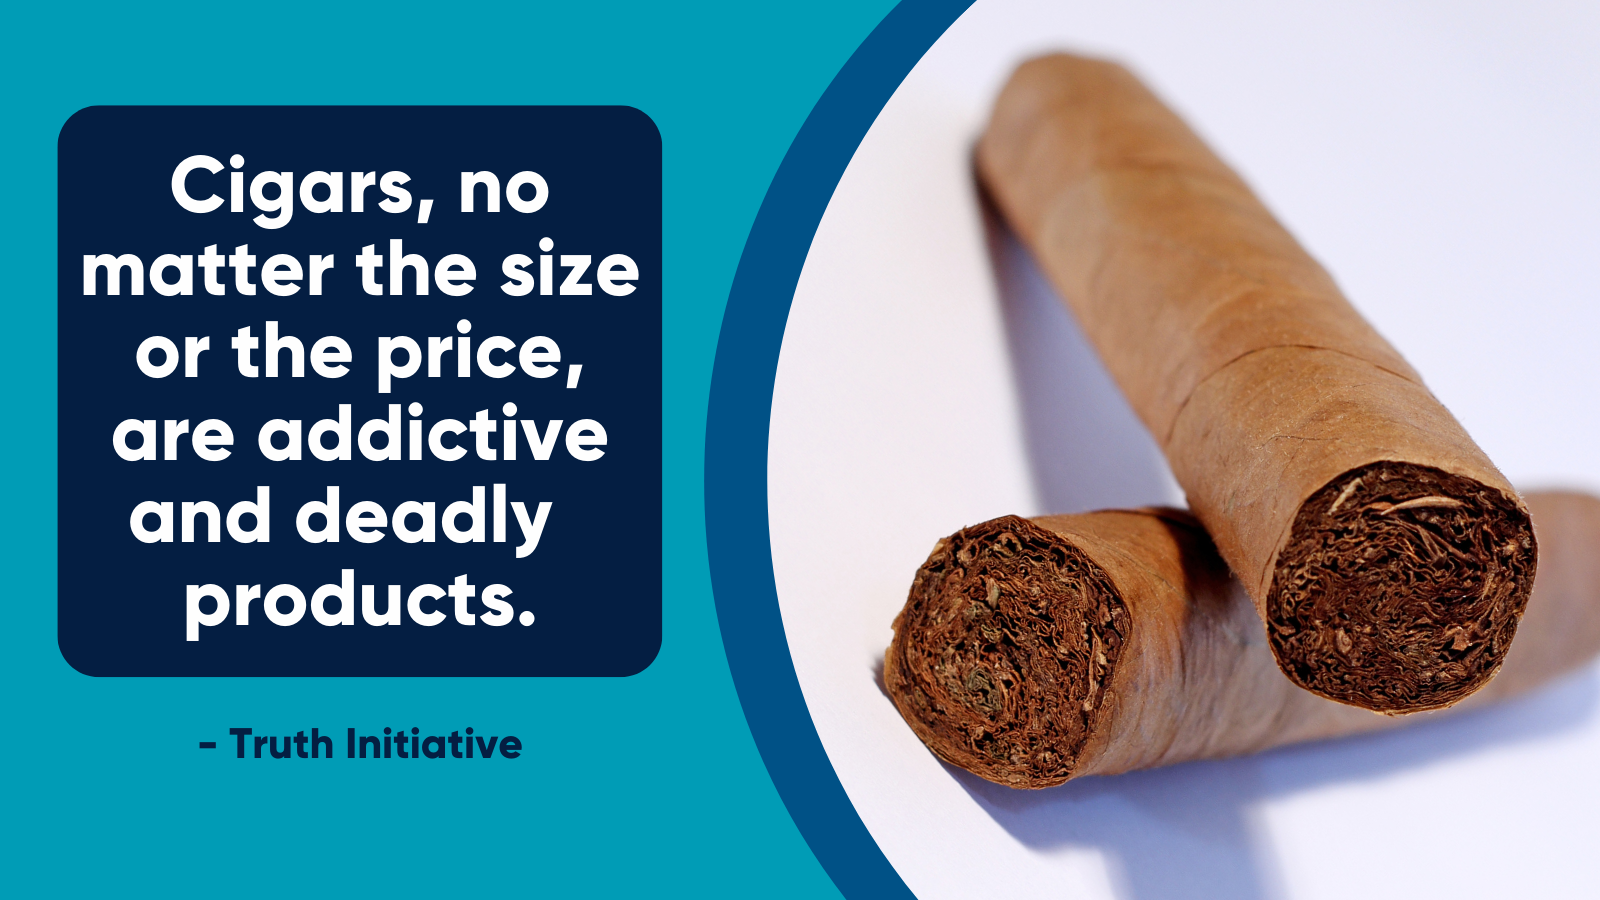 "Cigars, no matter the size or the price, are addictive and deadly products." Truth Initiative